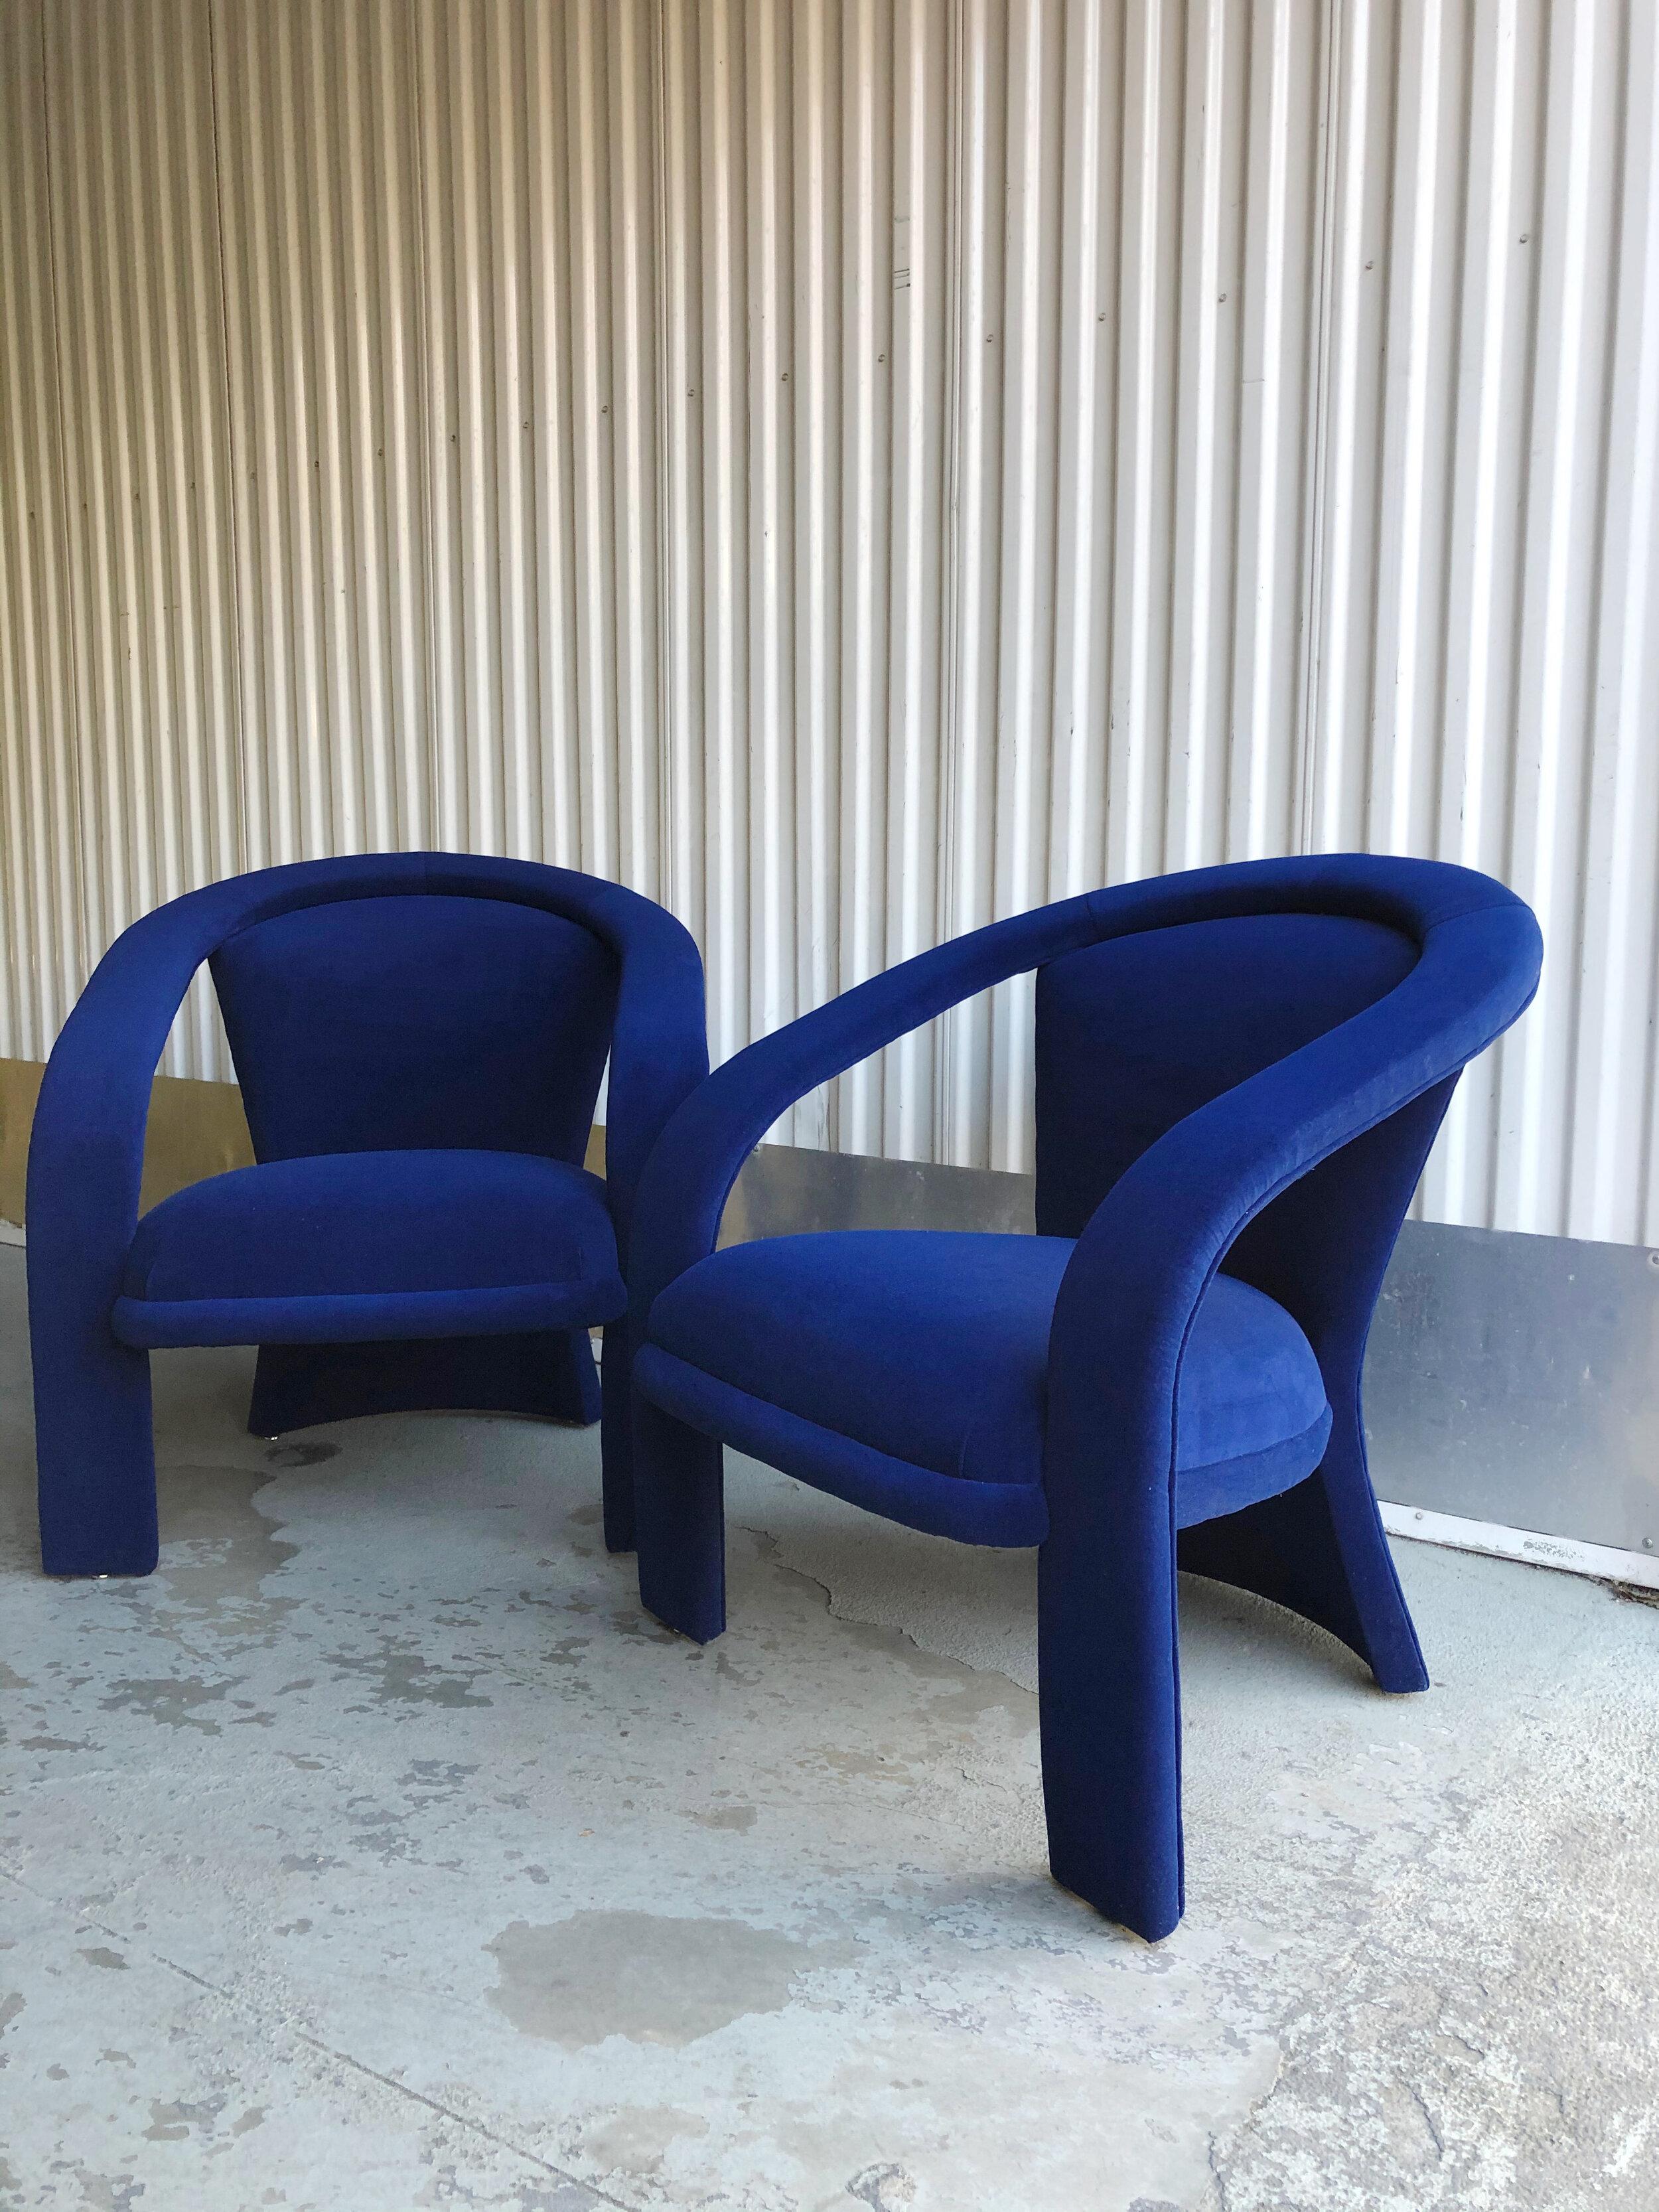 Sculptural post modern armchairs in indigo cotton velvet, in the style of Marge Carson and LaBarge Furniture.

New upholstery, likely in the last 5 years, in stunning shade of deep blue. Gorgeous clean lines and curvatures, particularly with the